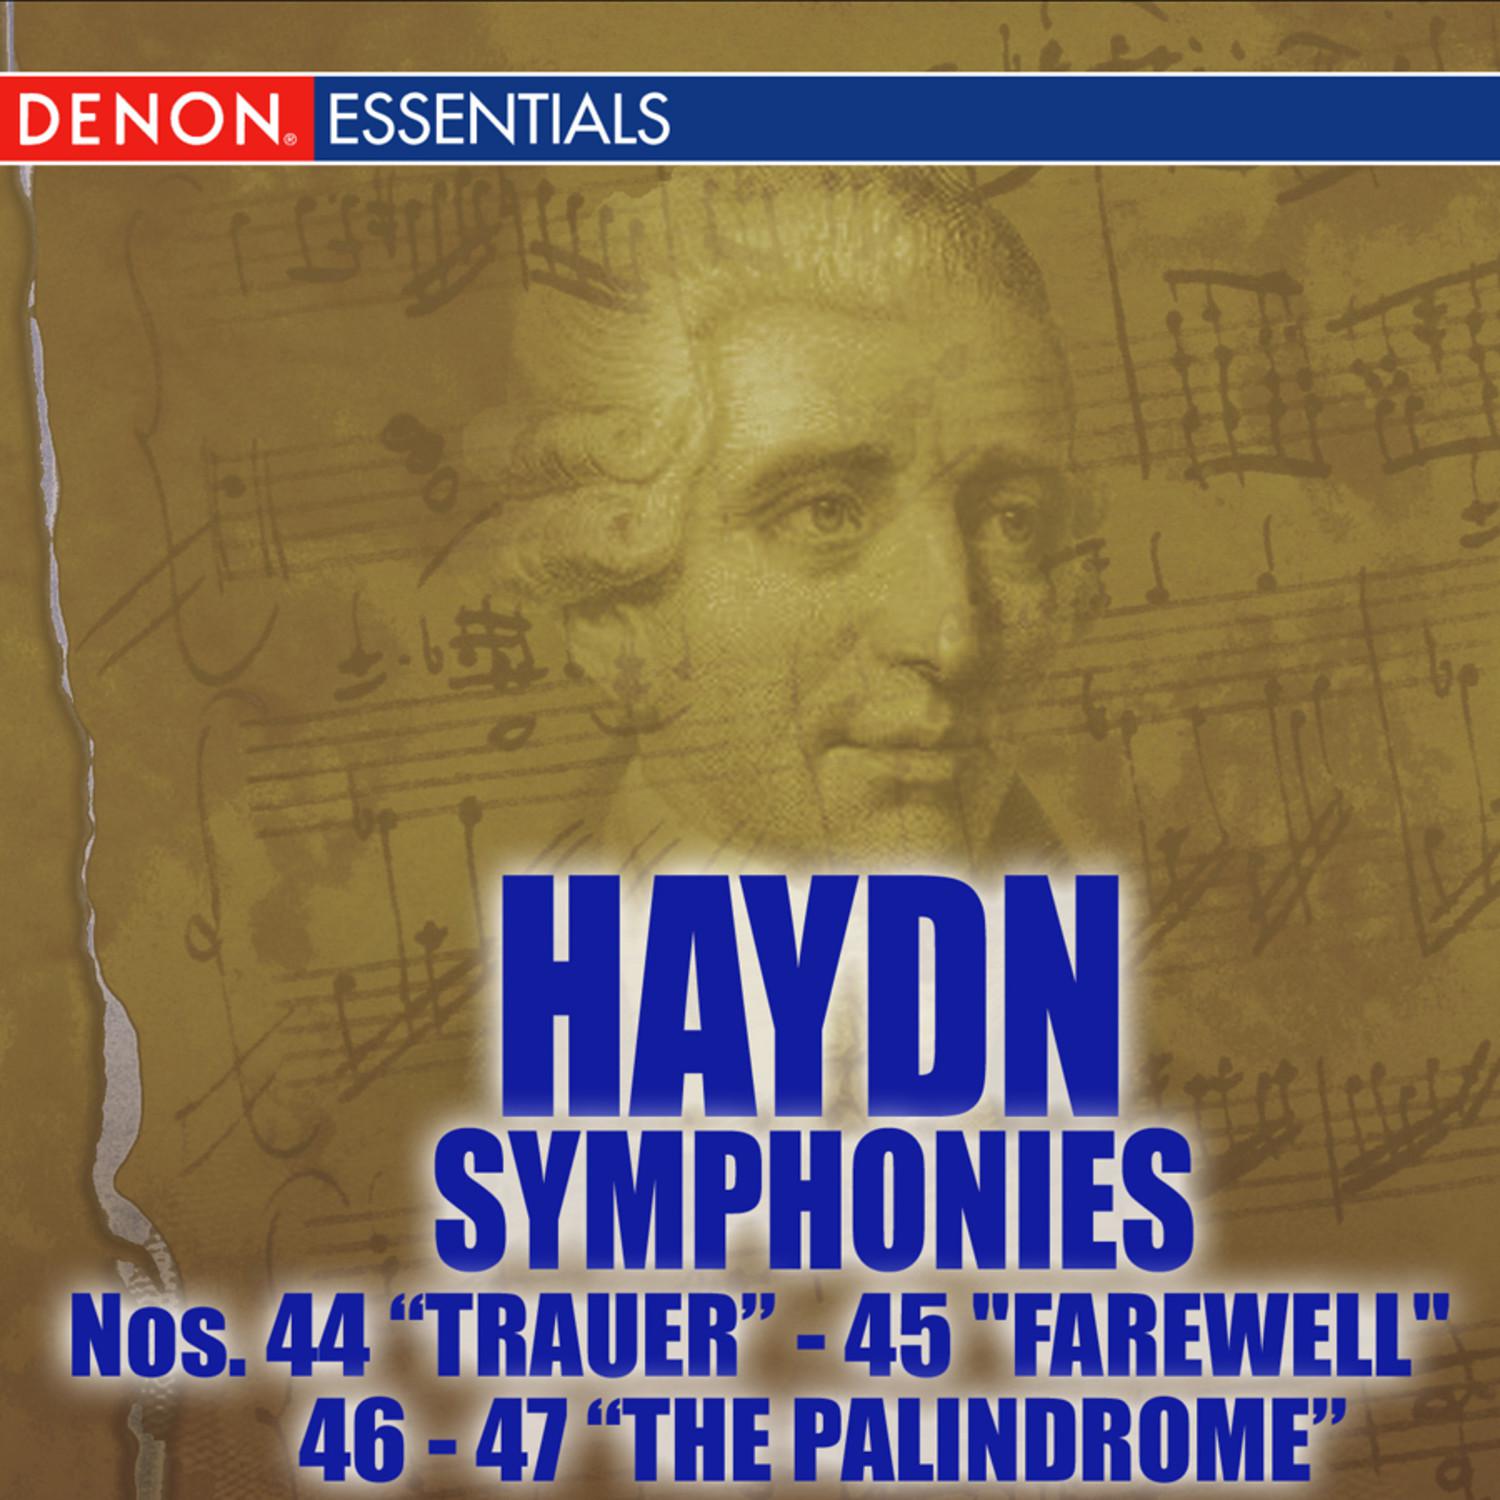 Haydn Symphony No. 47 in G Major "The Palindrome": I. Allegro